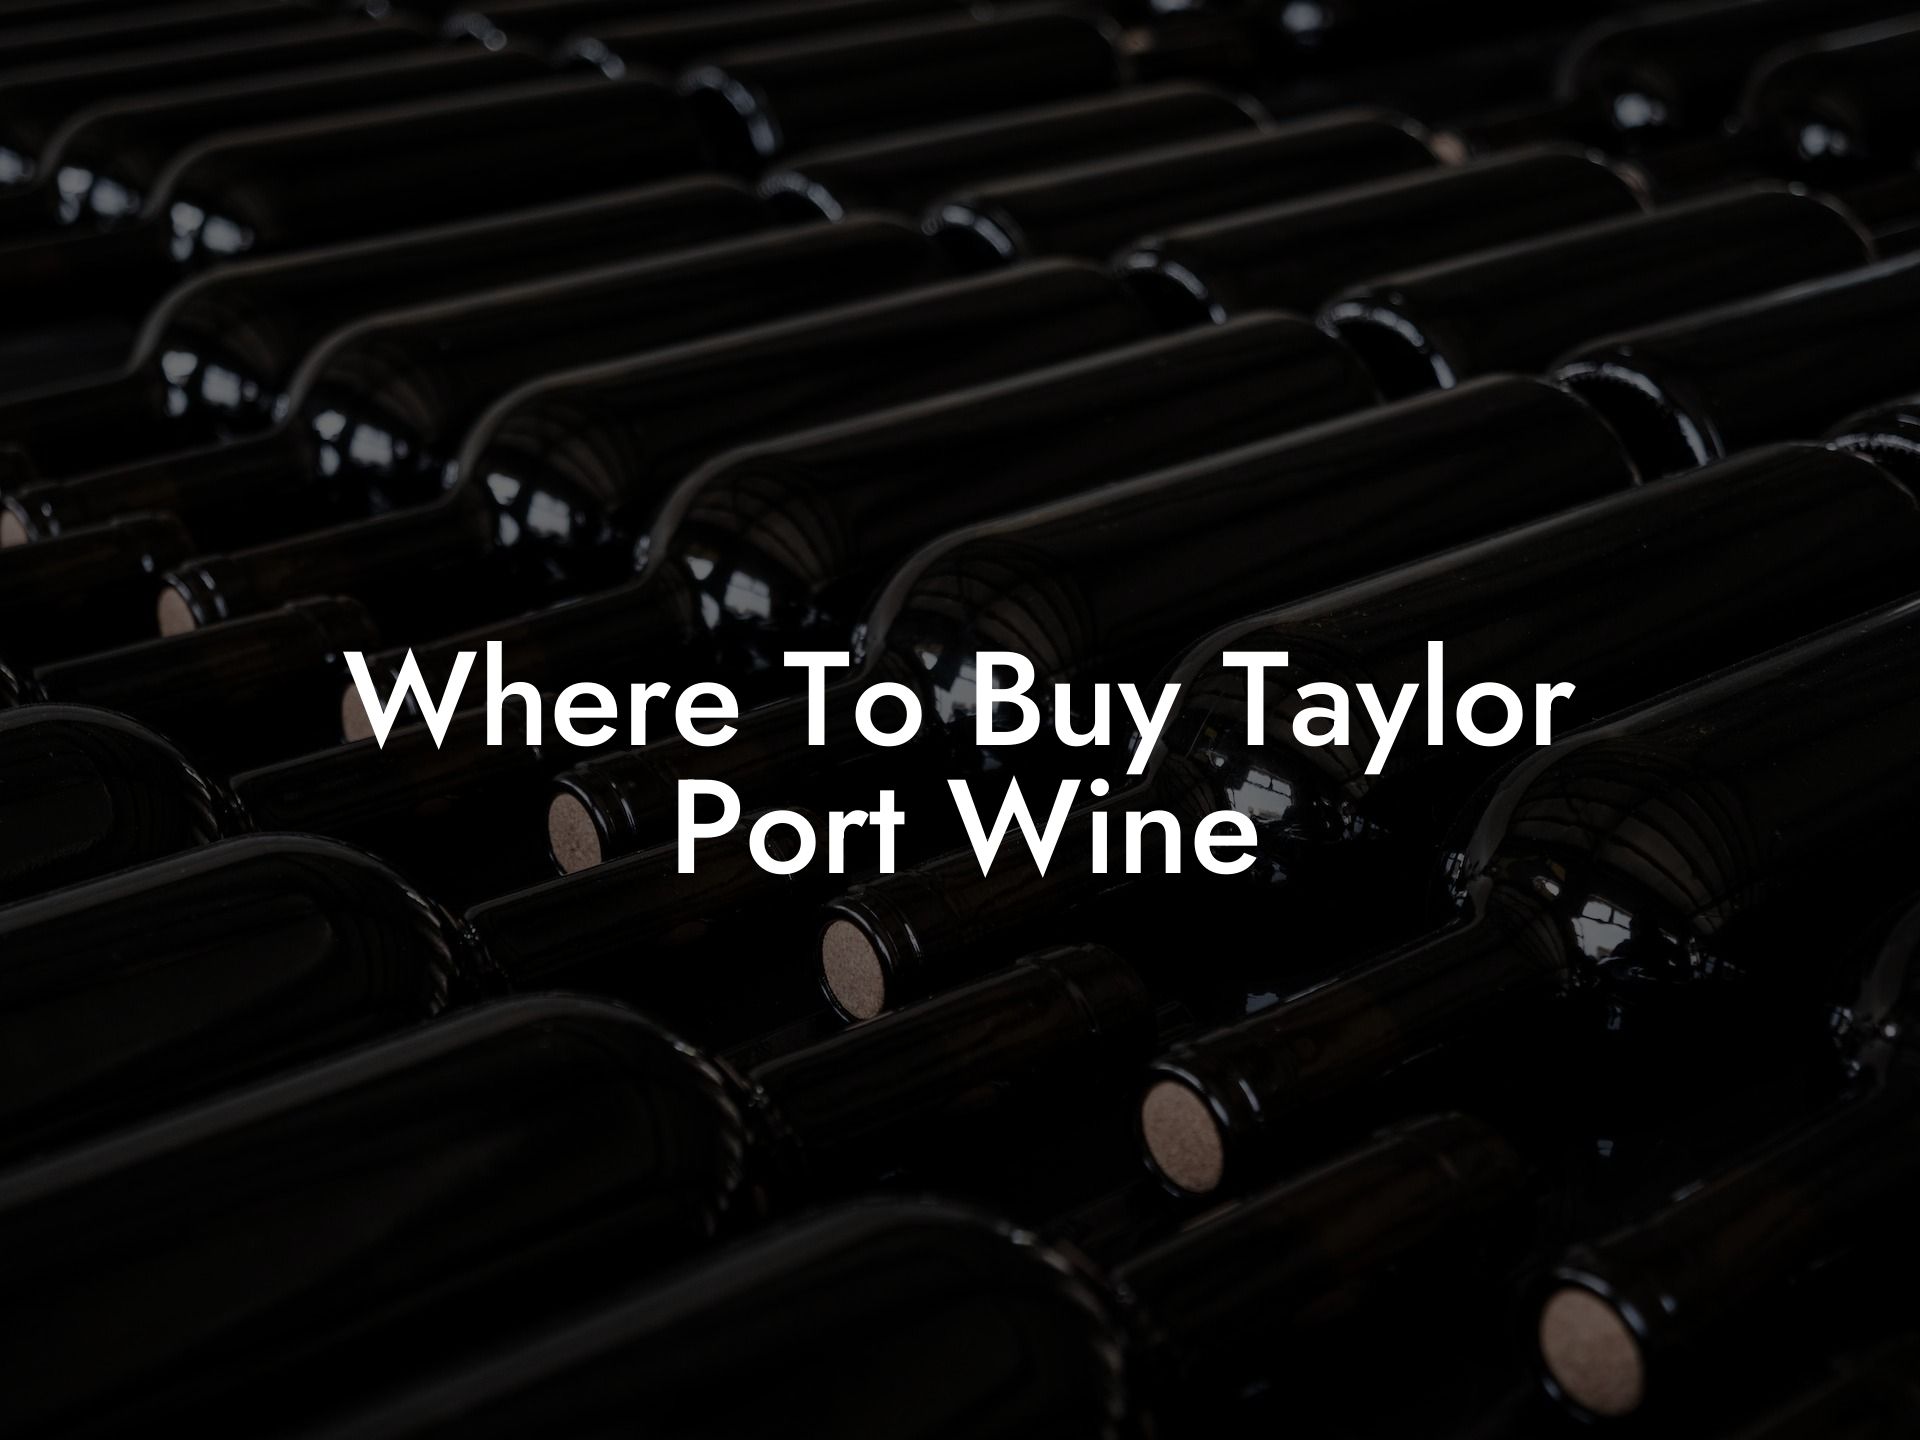 Where To Buy Taylor Port Wine